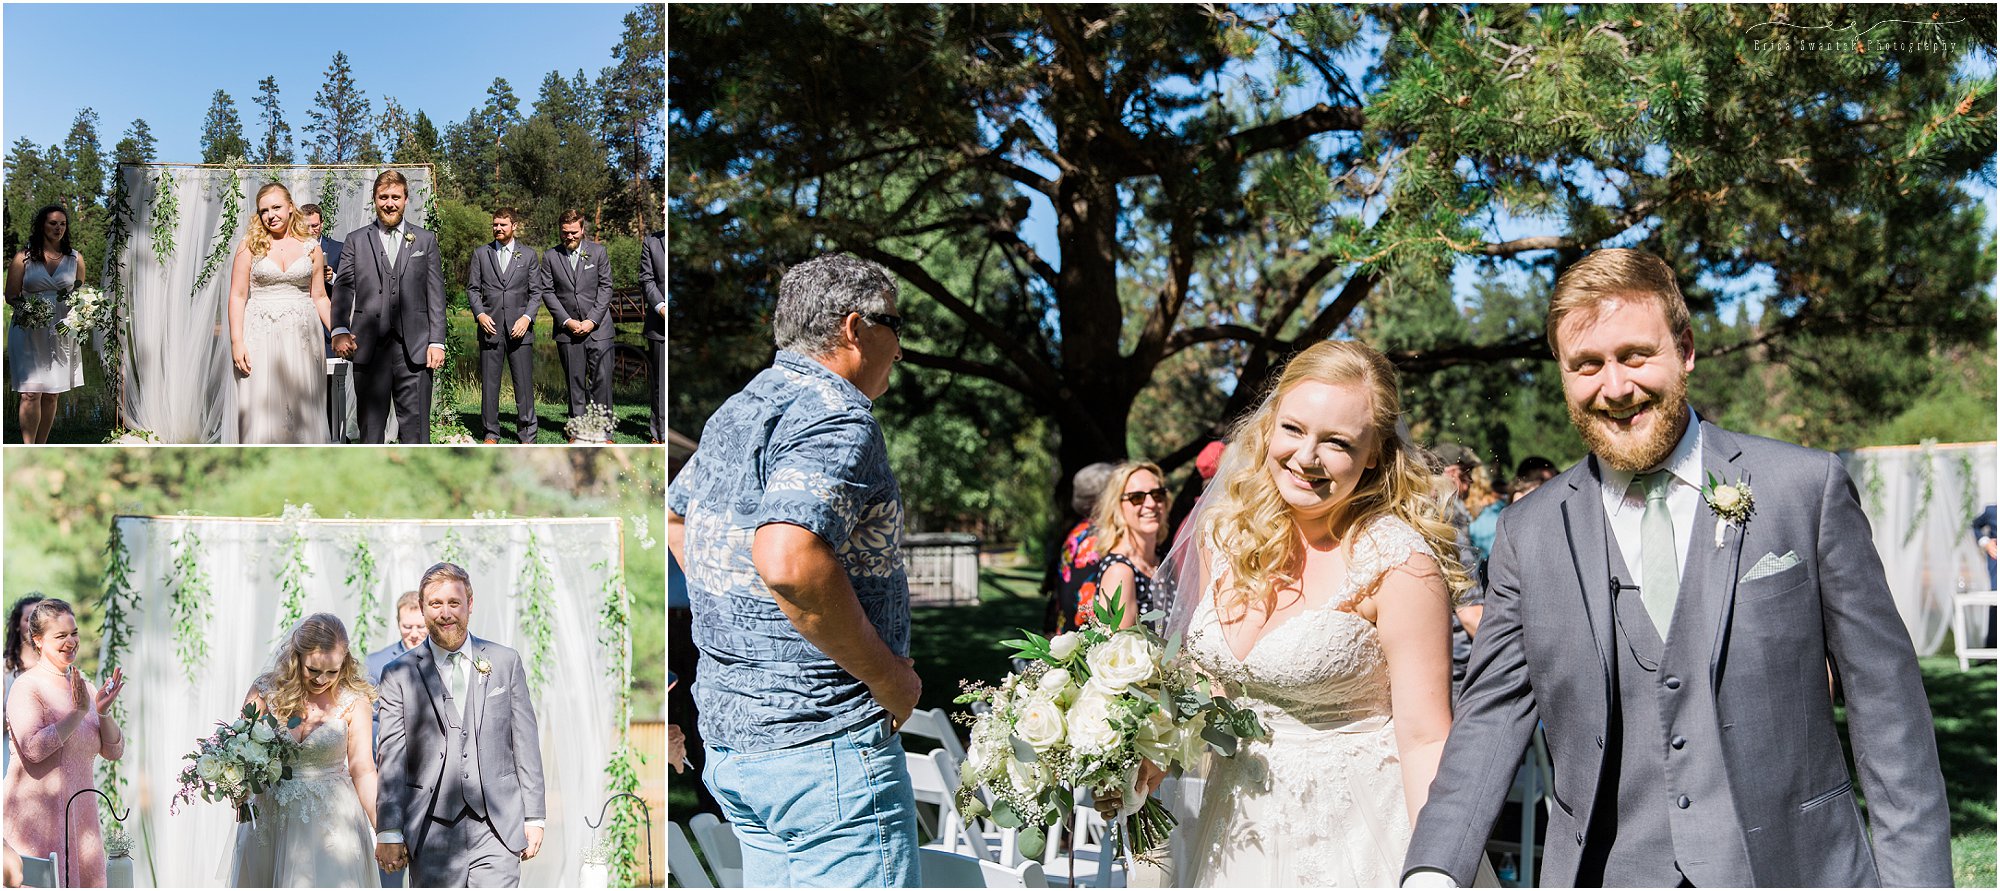 A newly married couple is showered with birdseed as they walk down the aisle at the outdoor ceremony in Bend, OR. | Erica Swantek Photography